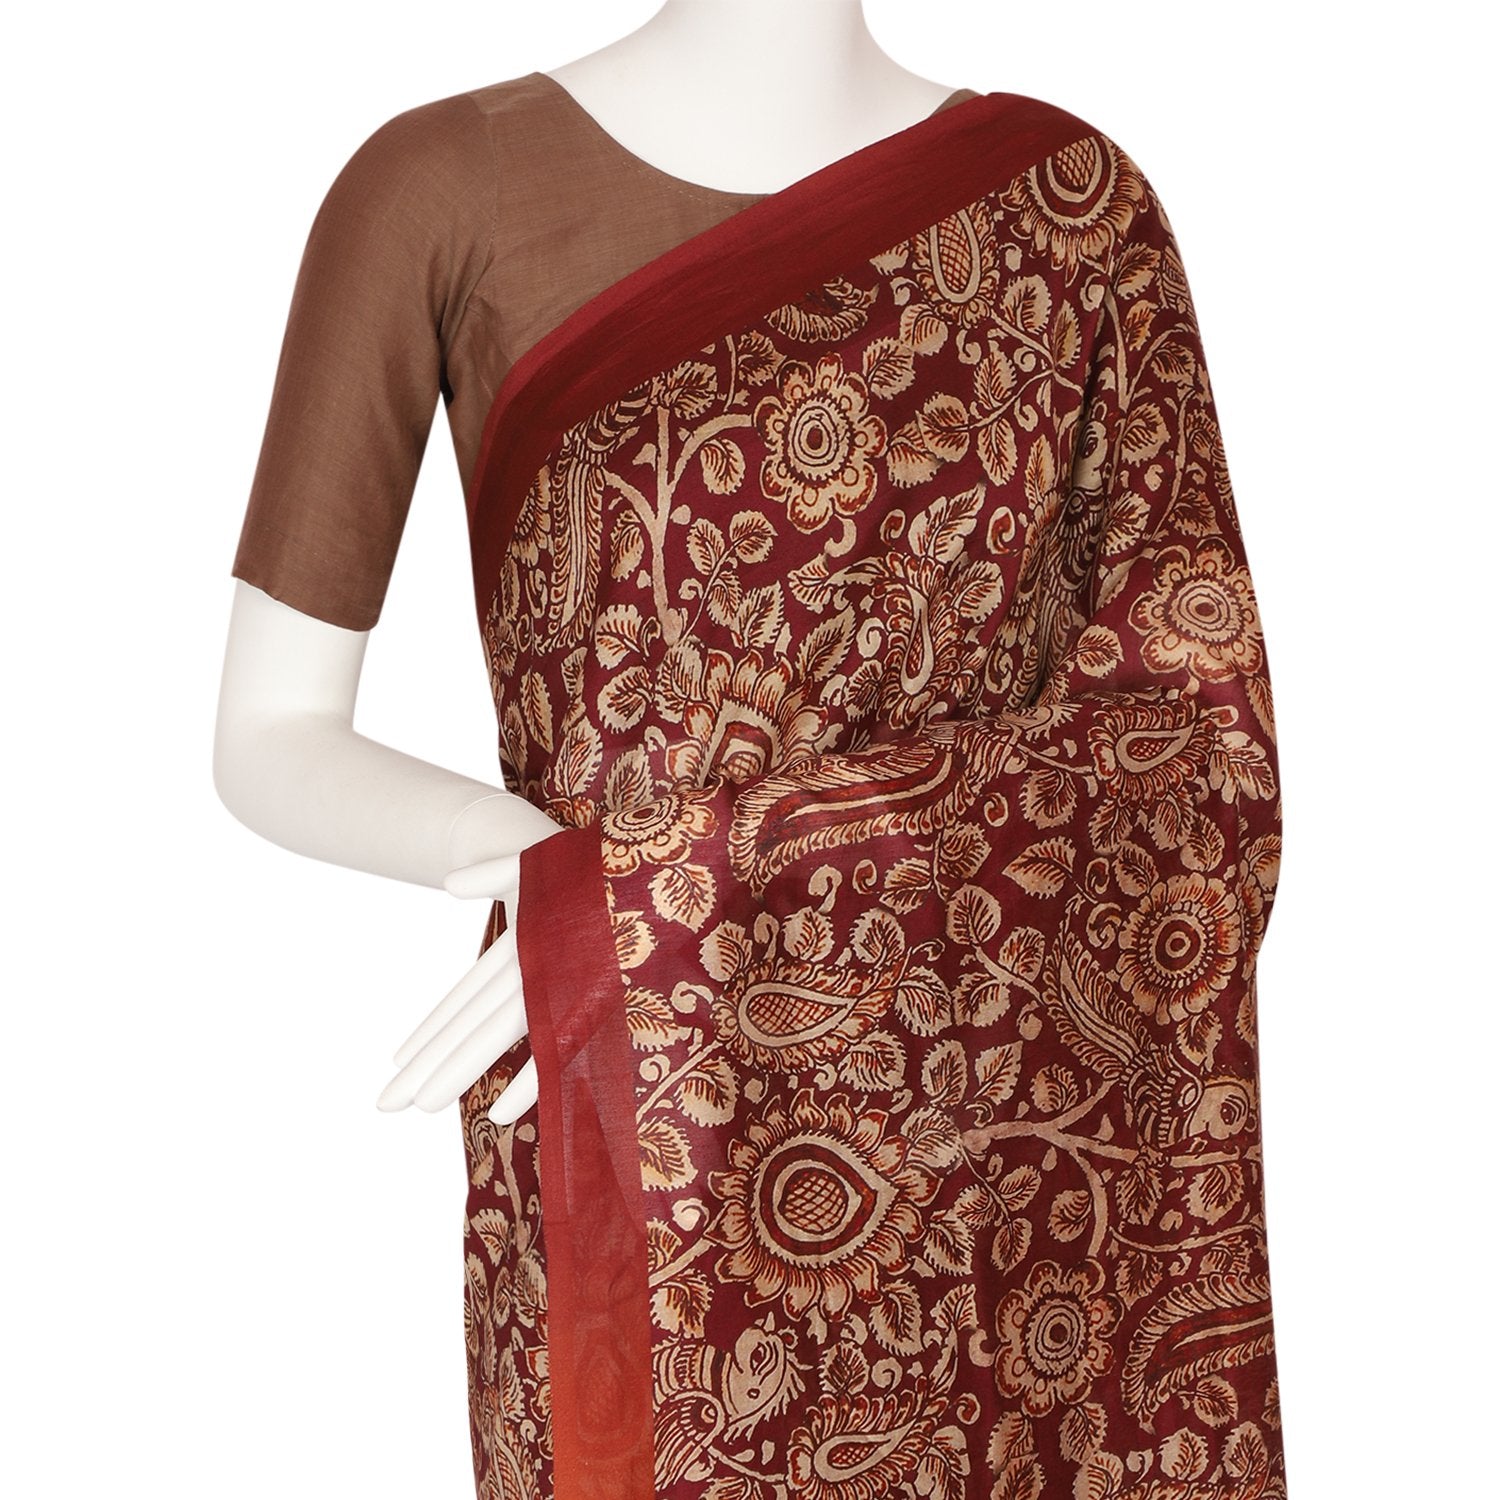 Maroon Color Digital Printed Pure Chanderi Saree With Blouse Piece